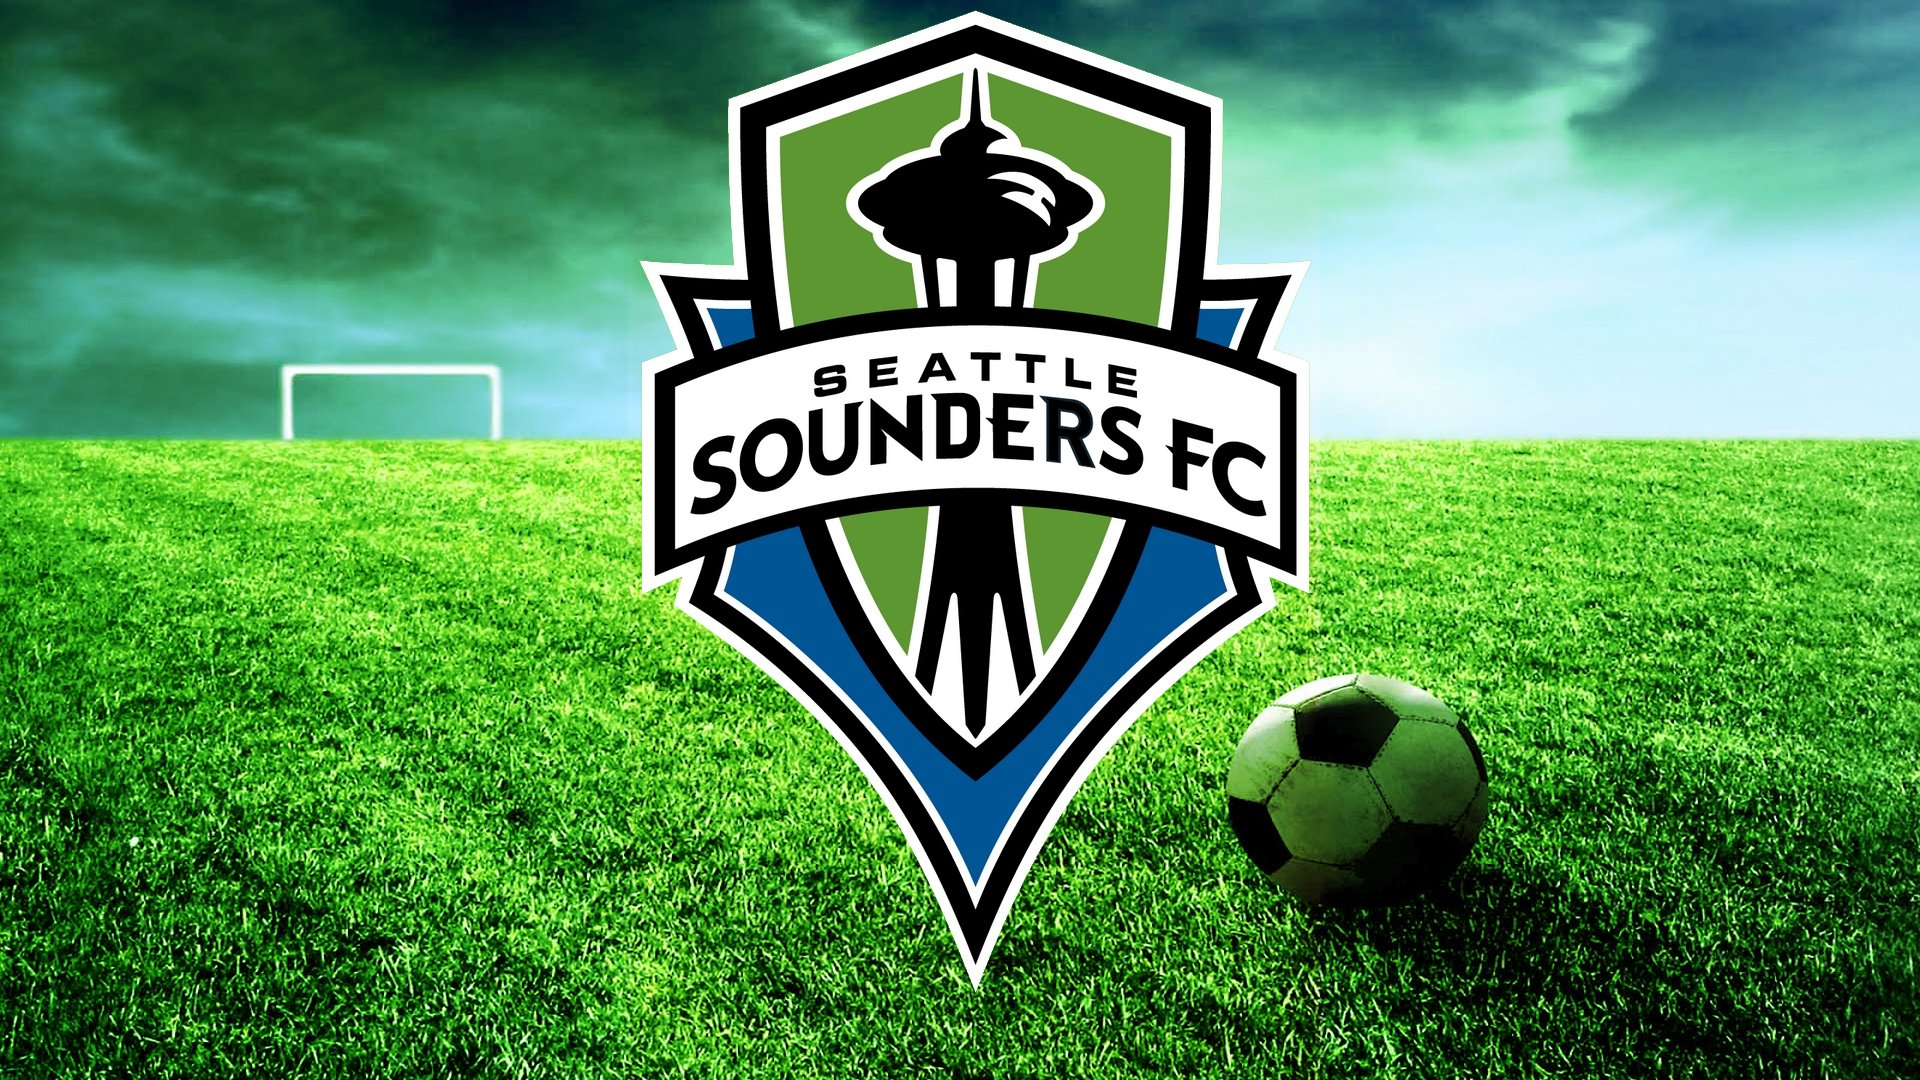 Seattle Sounders Fc HD Wallpaper Background Image